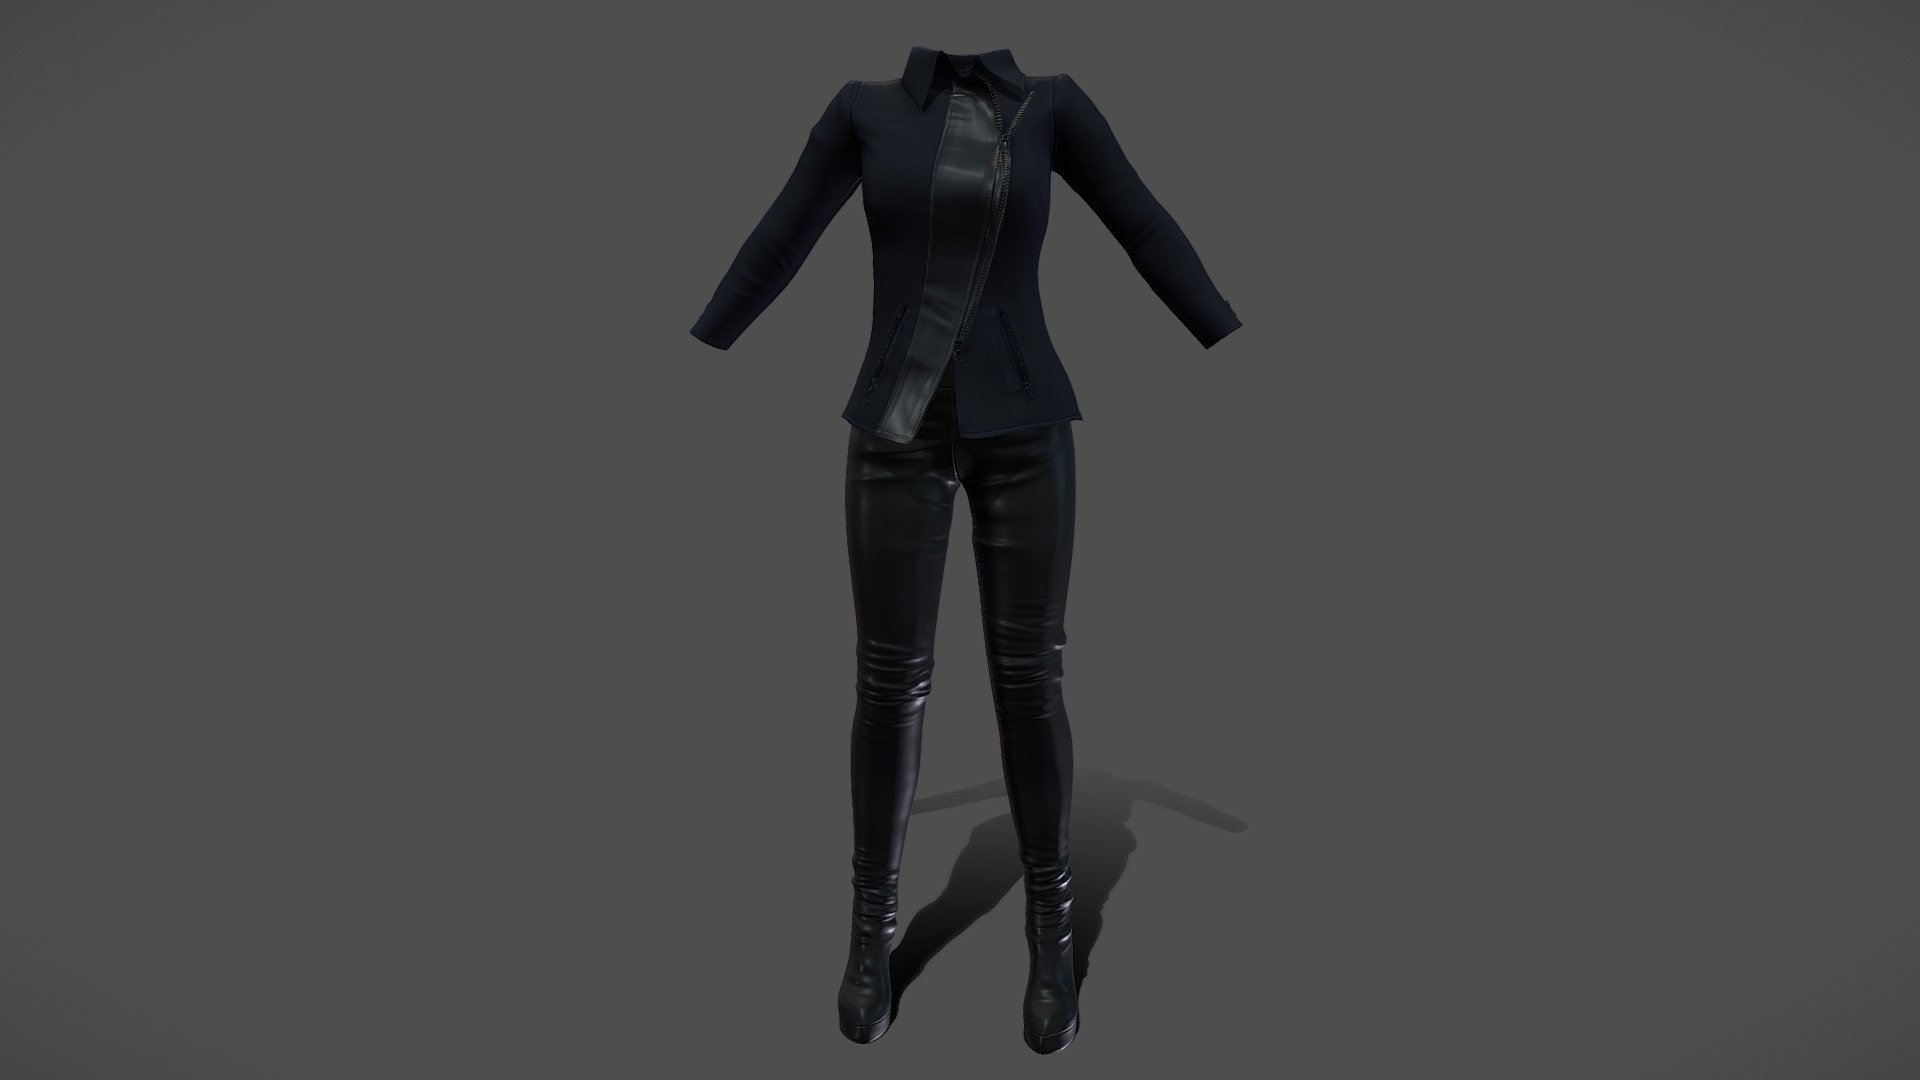 Jacket + Pants

Can be fitted to any character

Clean topology

No overlapping smart optimum unwrapped UVs

High-quality realistic textures

FBX, OBJ, gITF, USDZ (request other formats)

PBR or Classic

Please ask any other questions.

Type     user:3dia &ldquo;search term